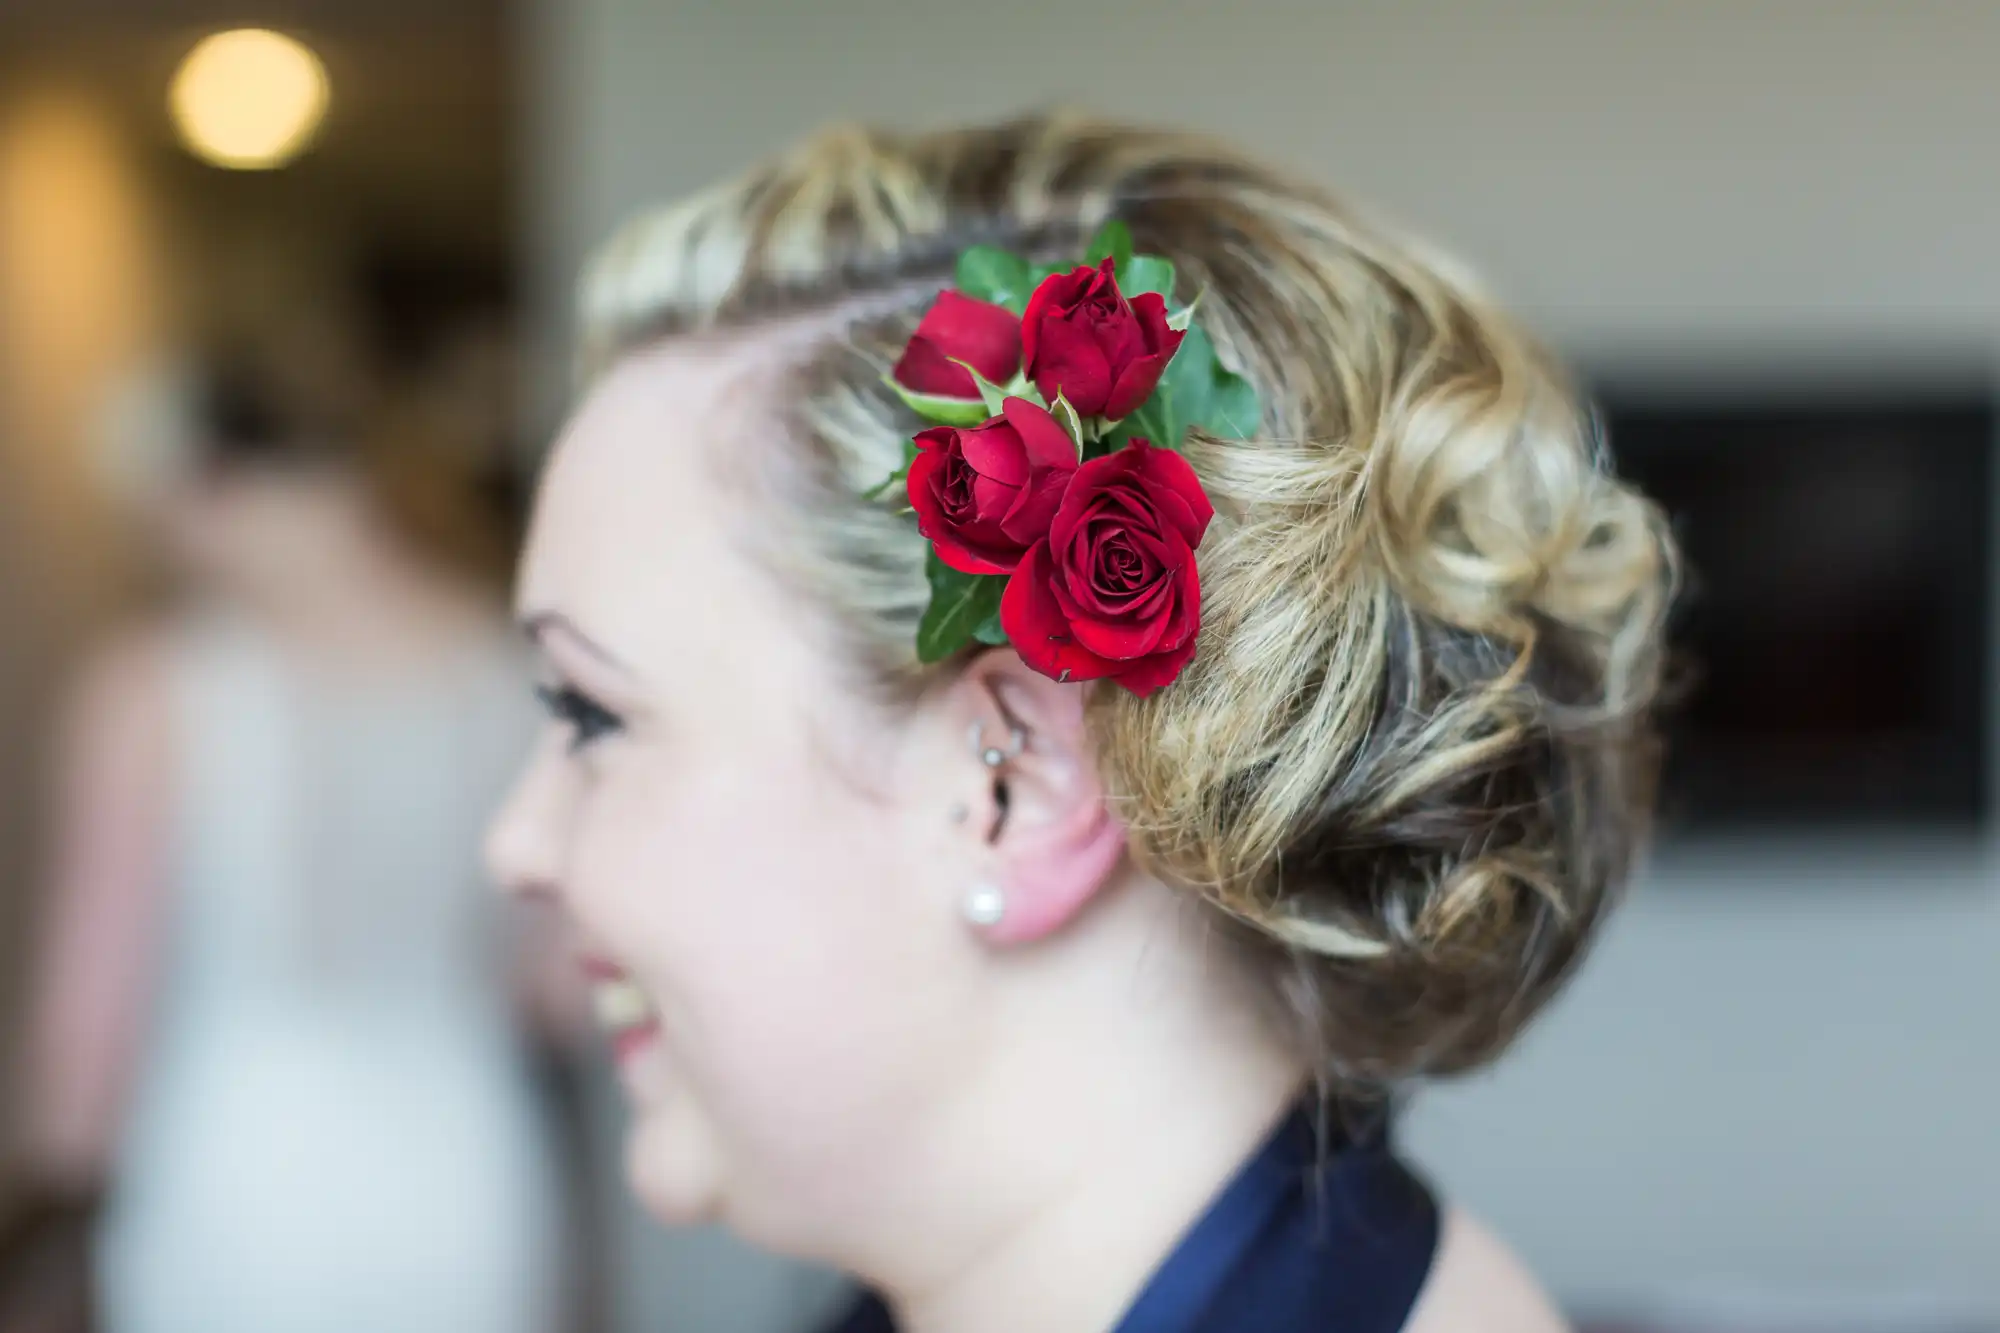 Profile view of a smiling woman with an elegant updo hairstyle adorned with red roses and green leaves.